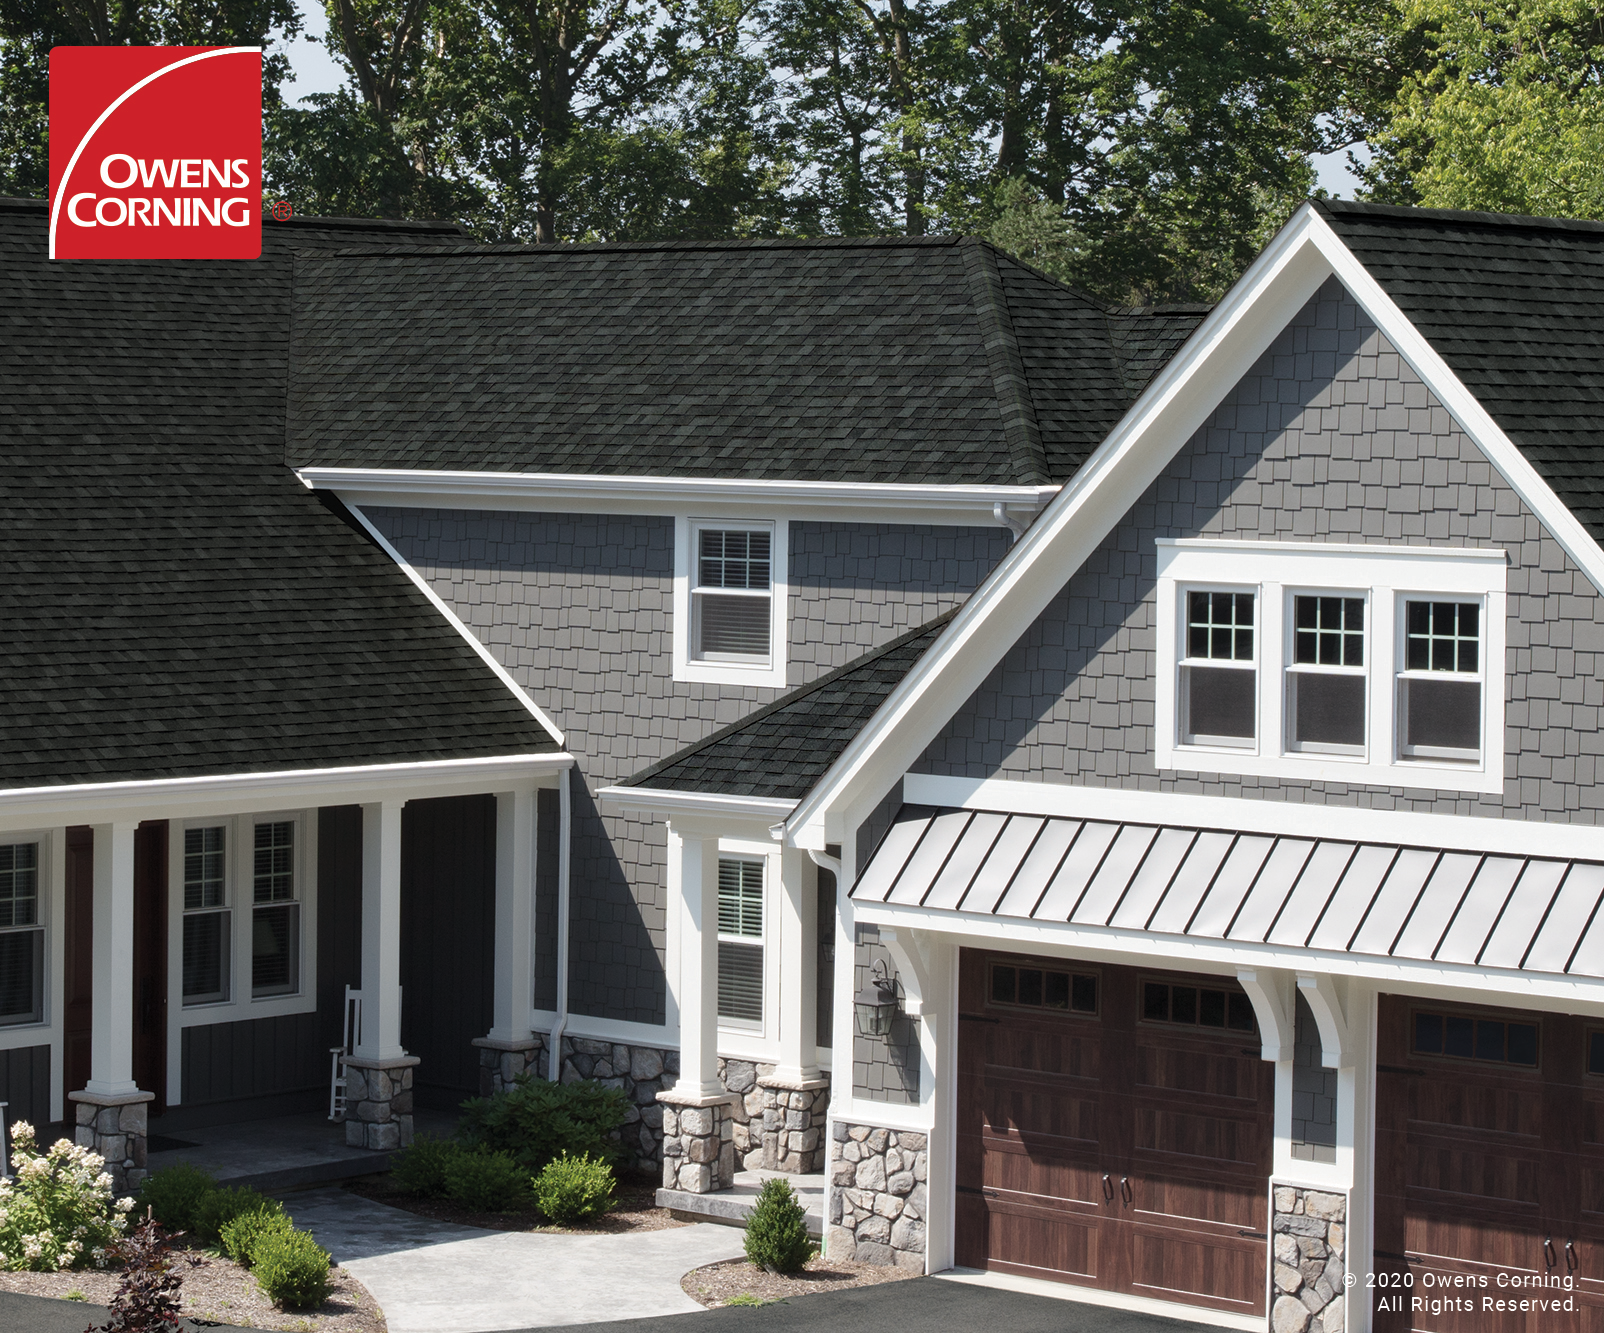 Top 5 Reasons to Choose TruDefinition® Duration FLEX® Shingles for Your Home